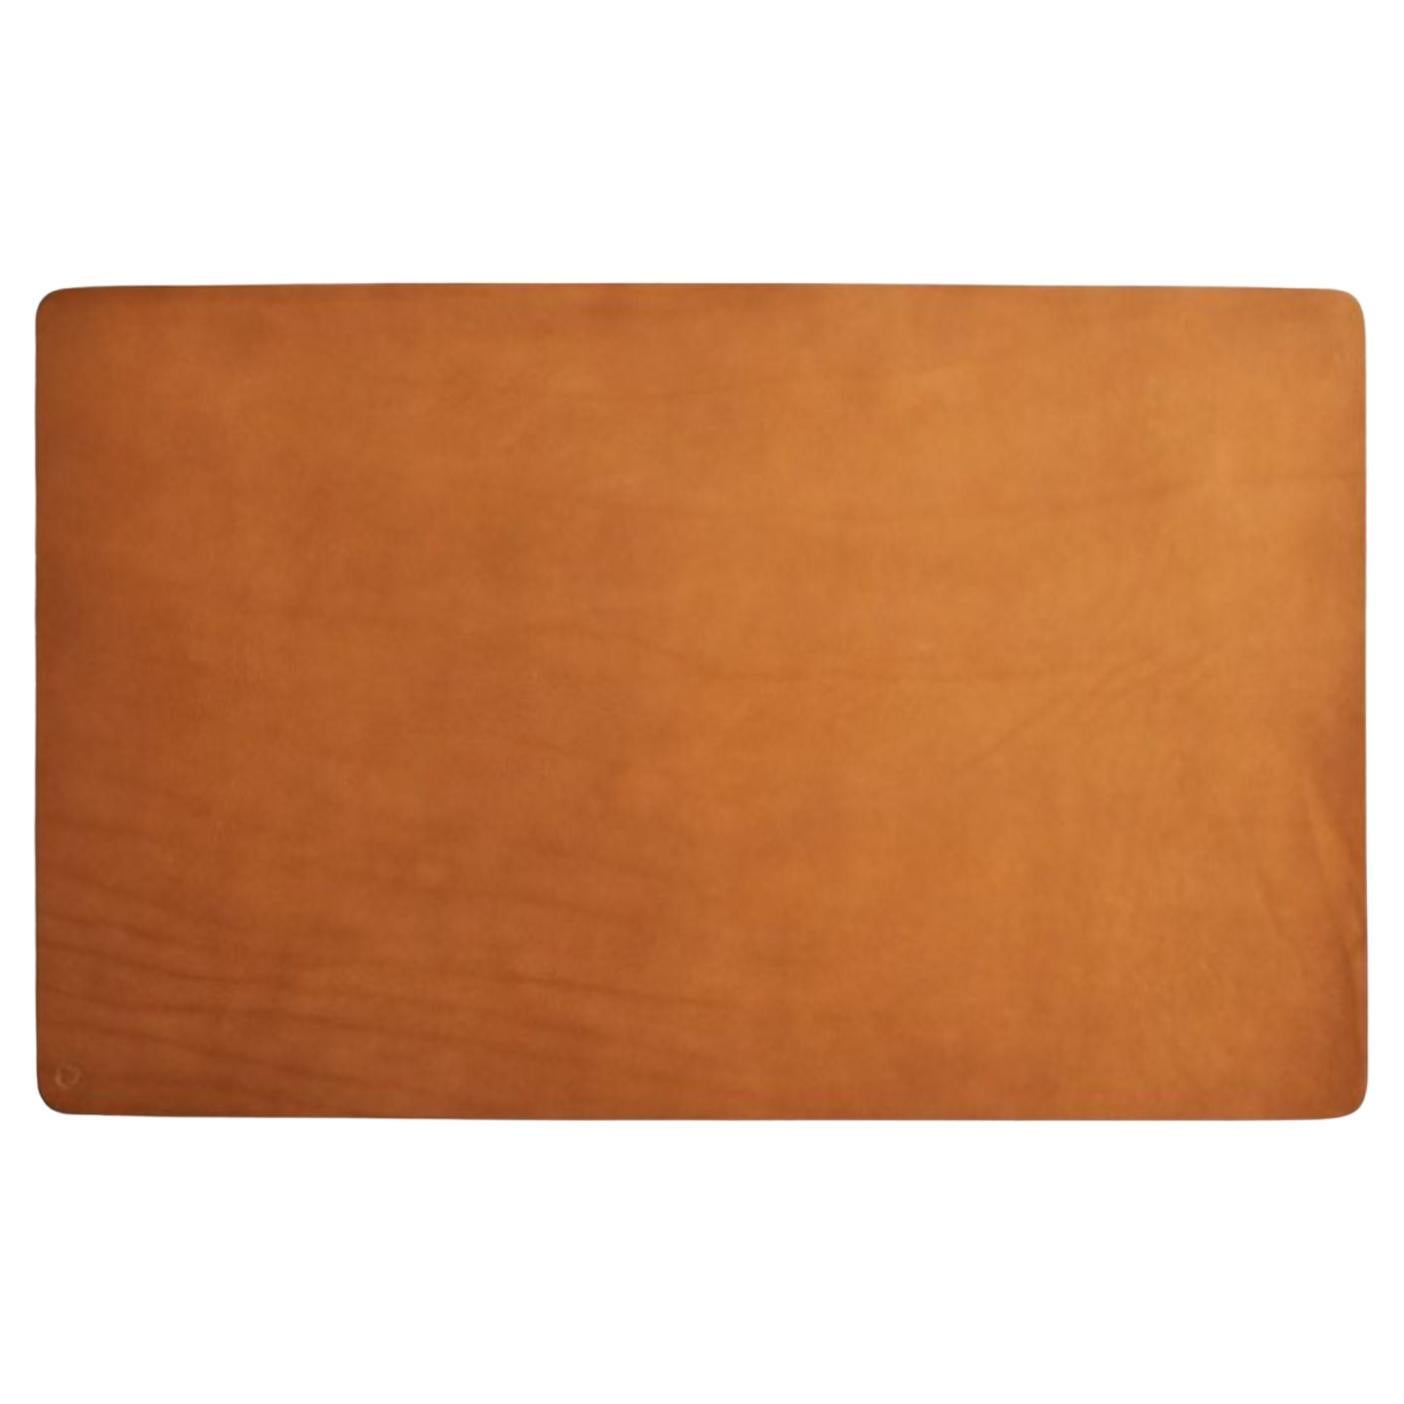 Small Tan Leather Desk Mat by Henry Wilson